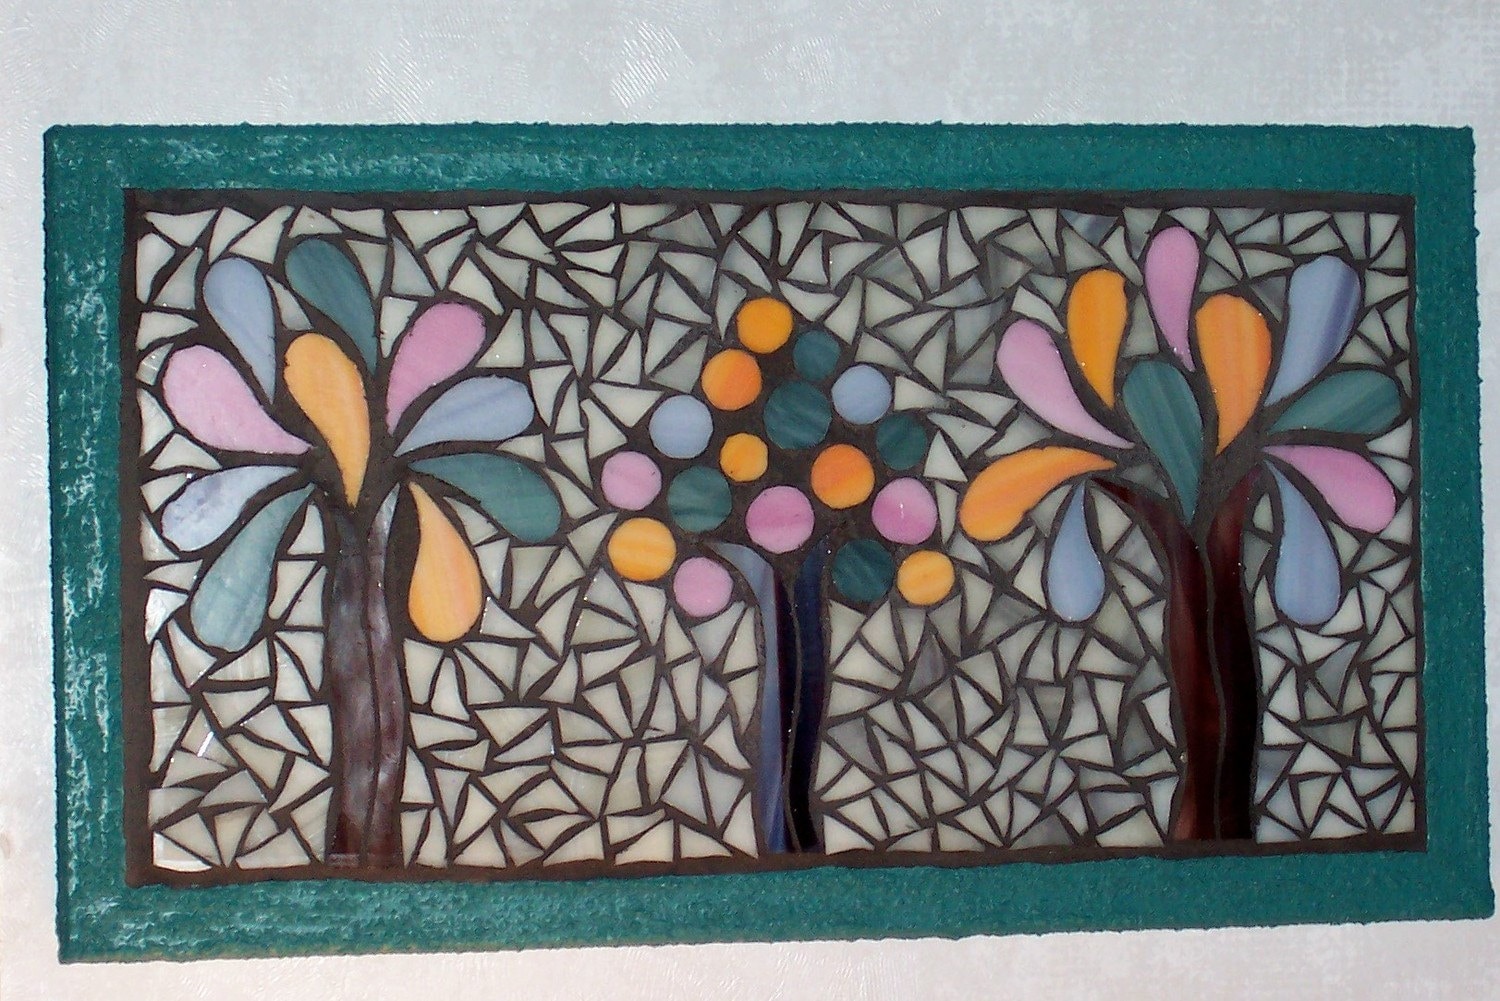 Stained Glass Mosaic Art Plaque Whimsical By Lowbridgeartworks